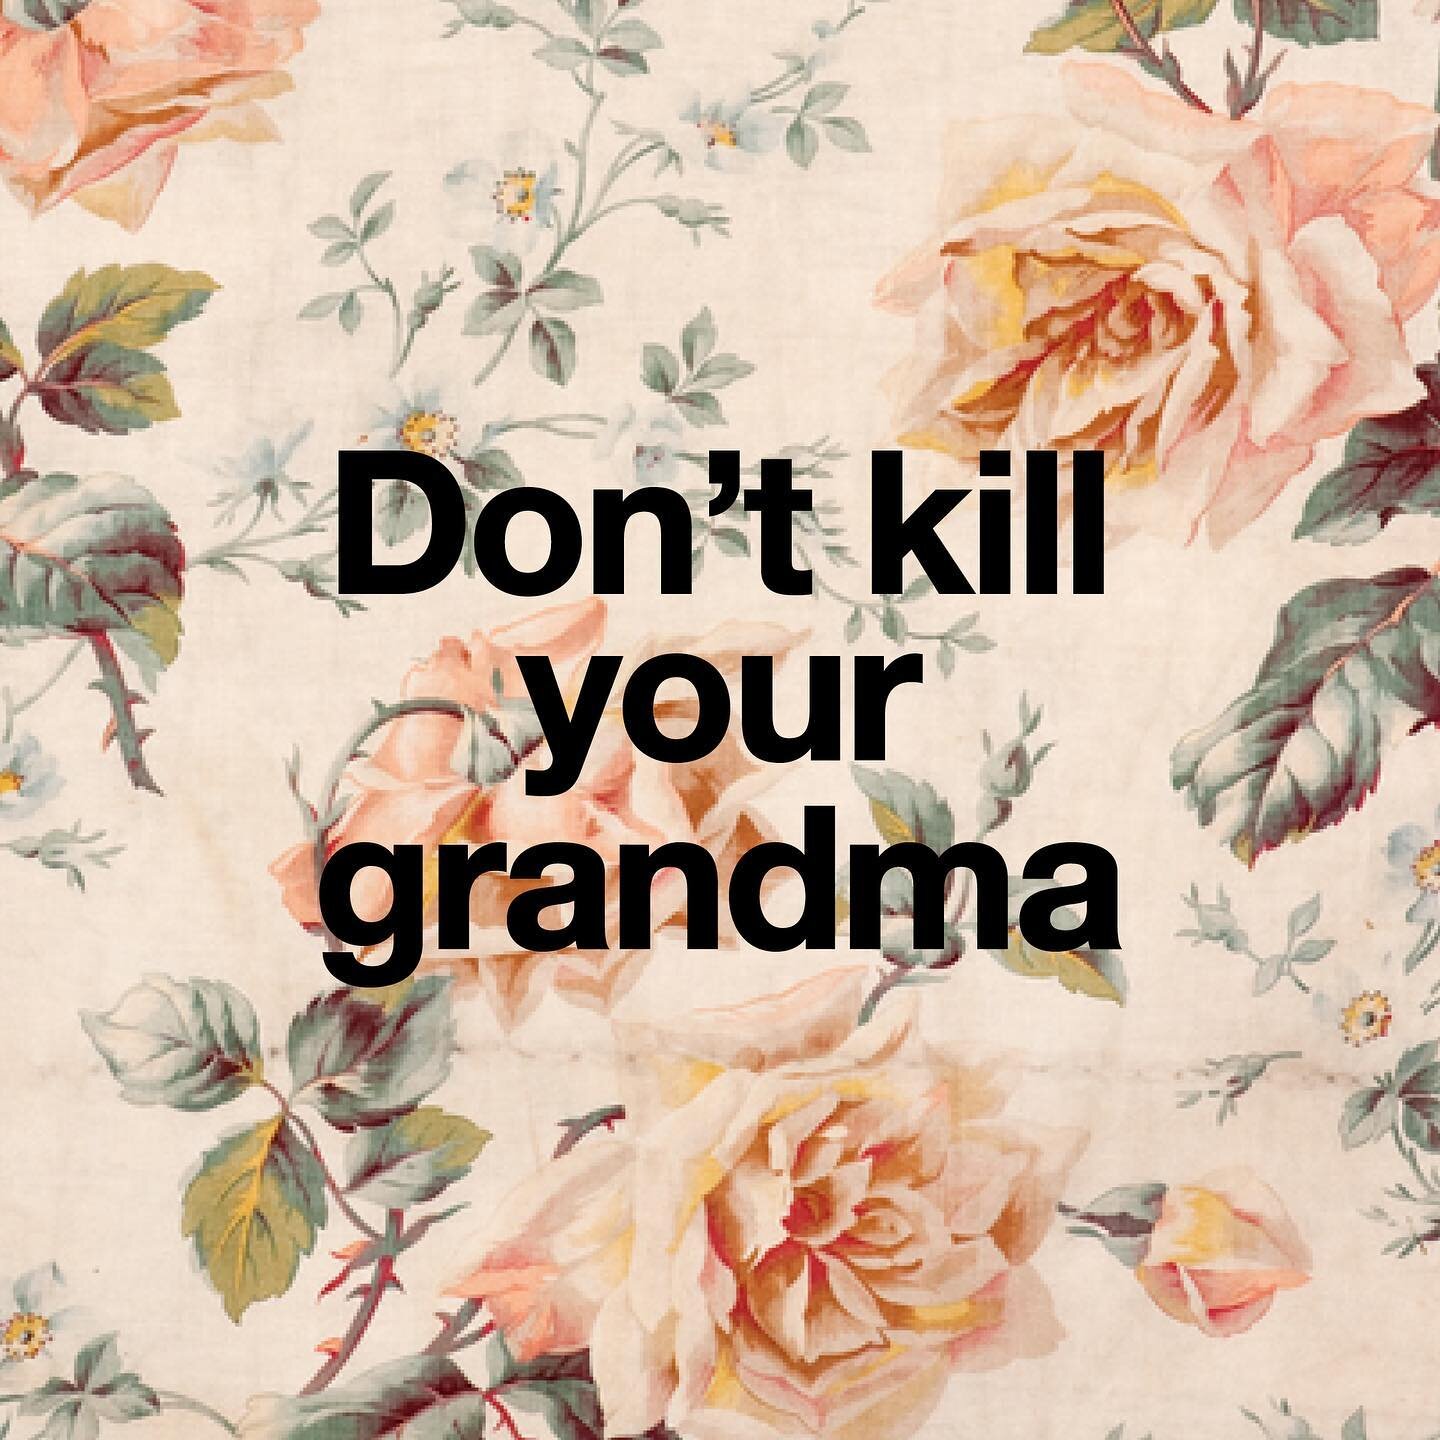 Stay distanced, stay home and stay safe.
Do it for grandma. 
#DontKillYourGrandma